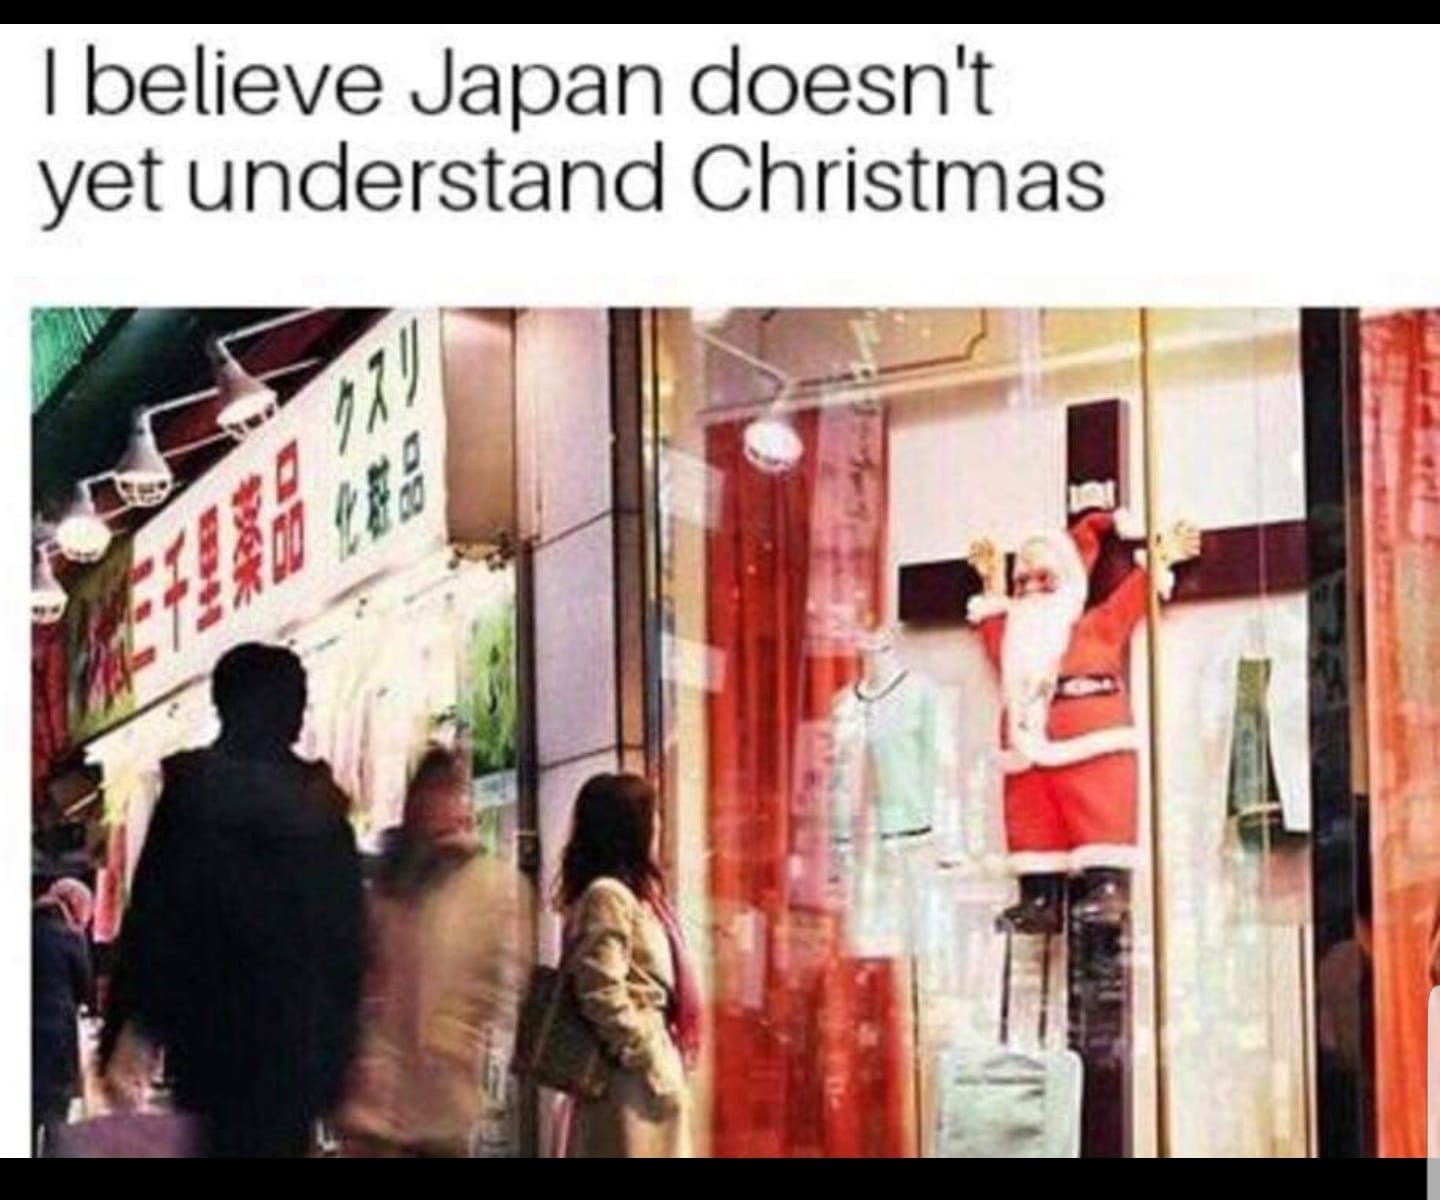 pic of Christmas decorations in Japan being a crucified Santa